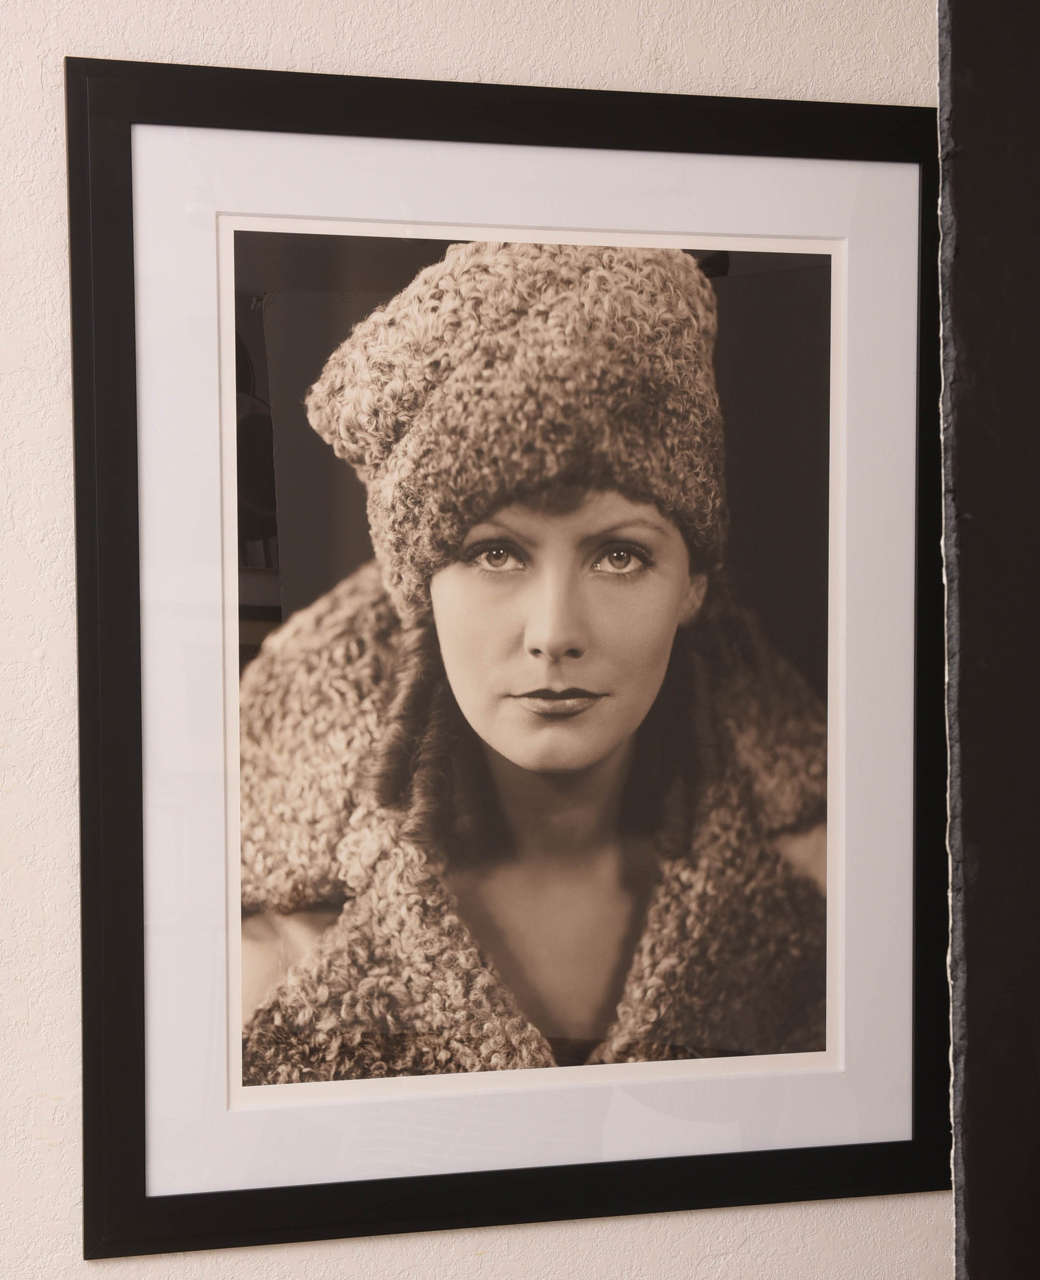 Framed archival pigment print (AP 3/5) of Greta Garbo circa 1936 by George Hurrell.  Produced under the authority of the Hurrell Estate Collection, LLC this print is part of a limited edition series of no more than 50 prints and five artist proofs. 